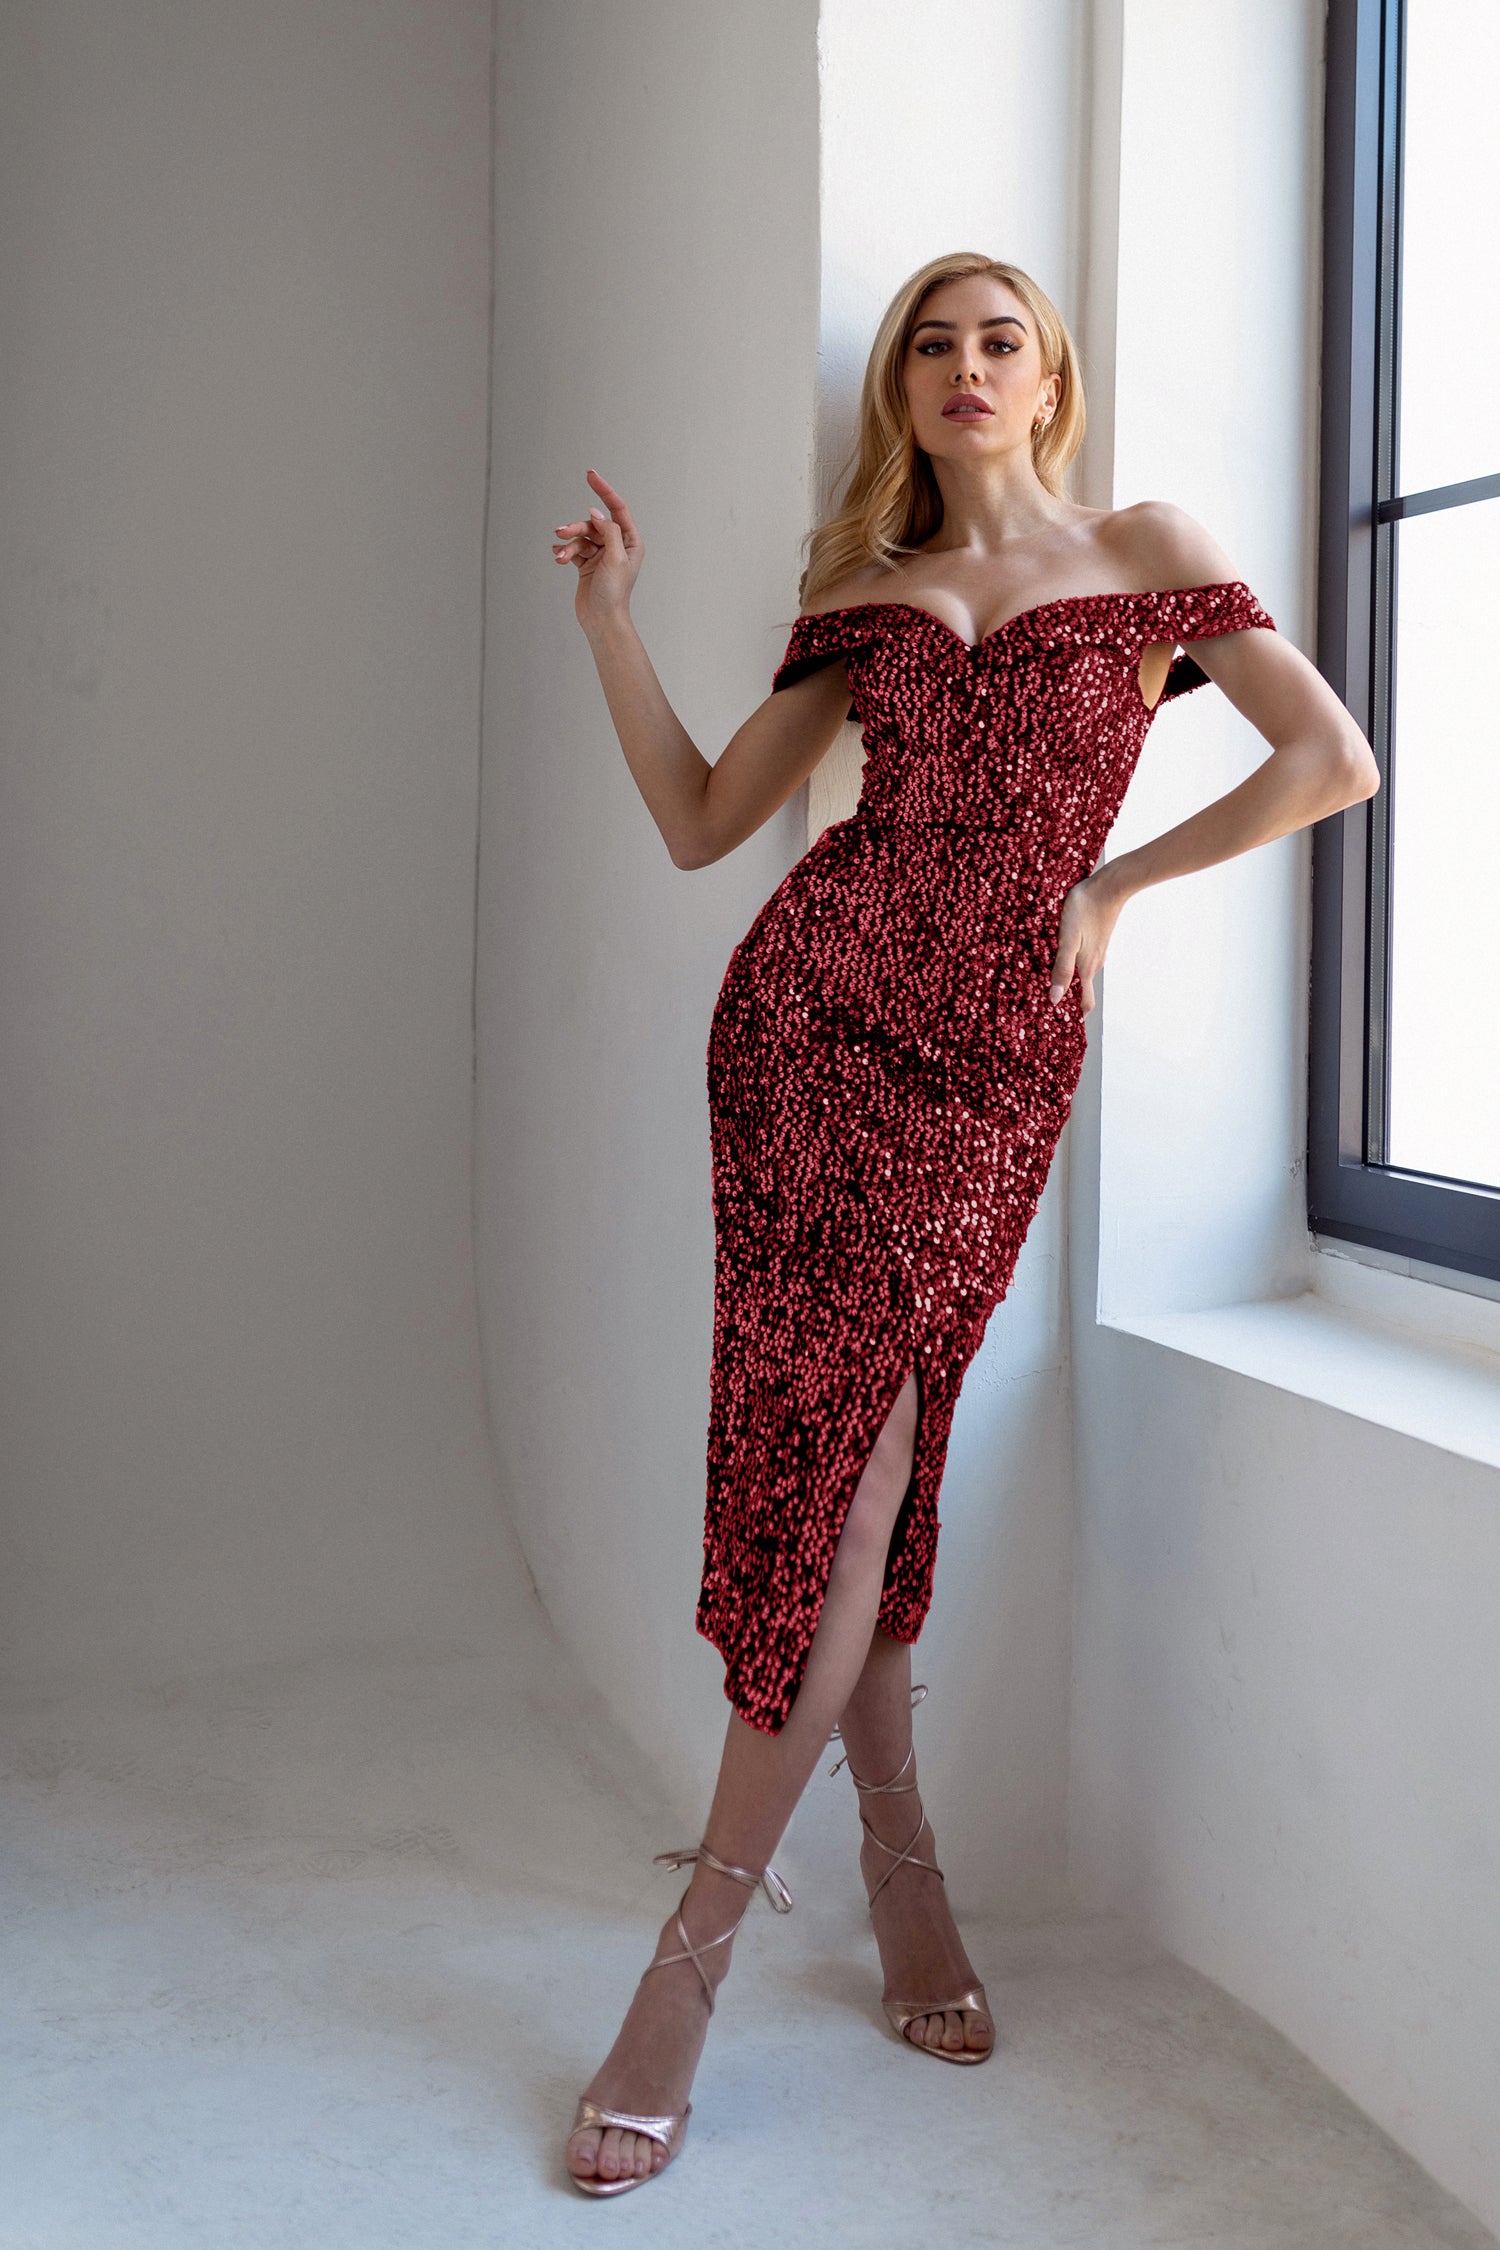 Tina Holly Couture TK271 Burgundy Sequins Off Shoulder Midi Dress features With Sweetheart Neckline and Leg Spilt Formal Dress